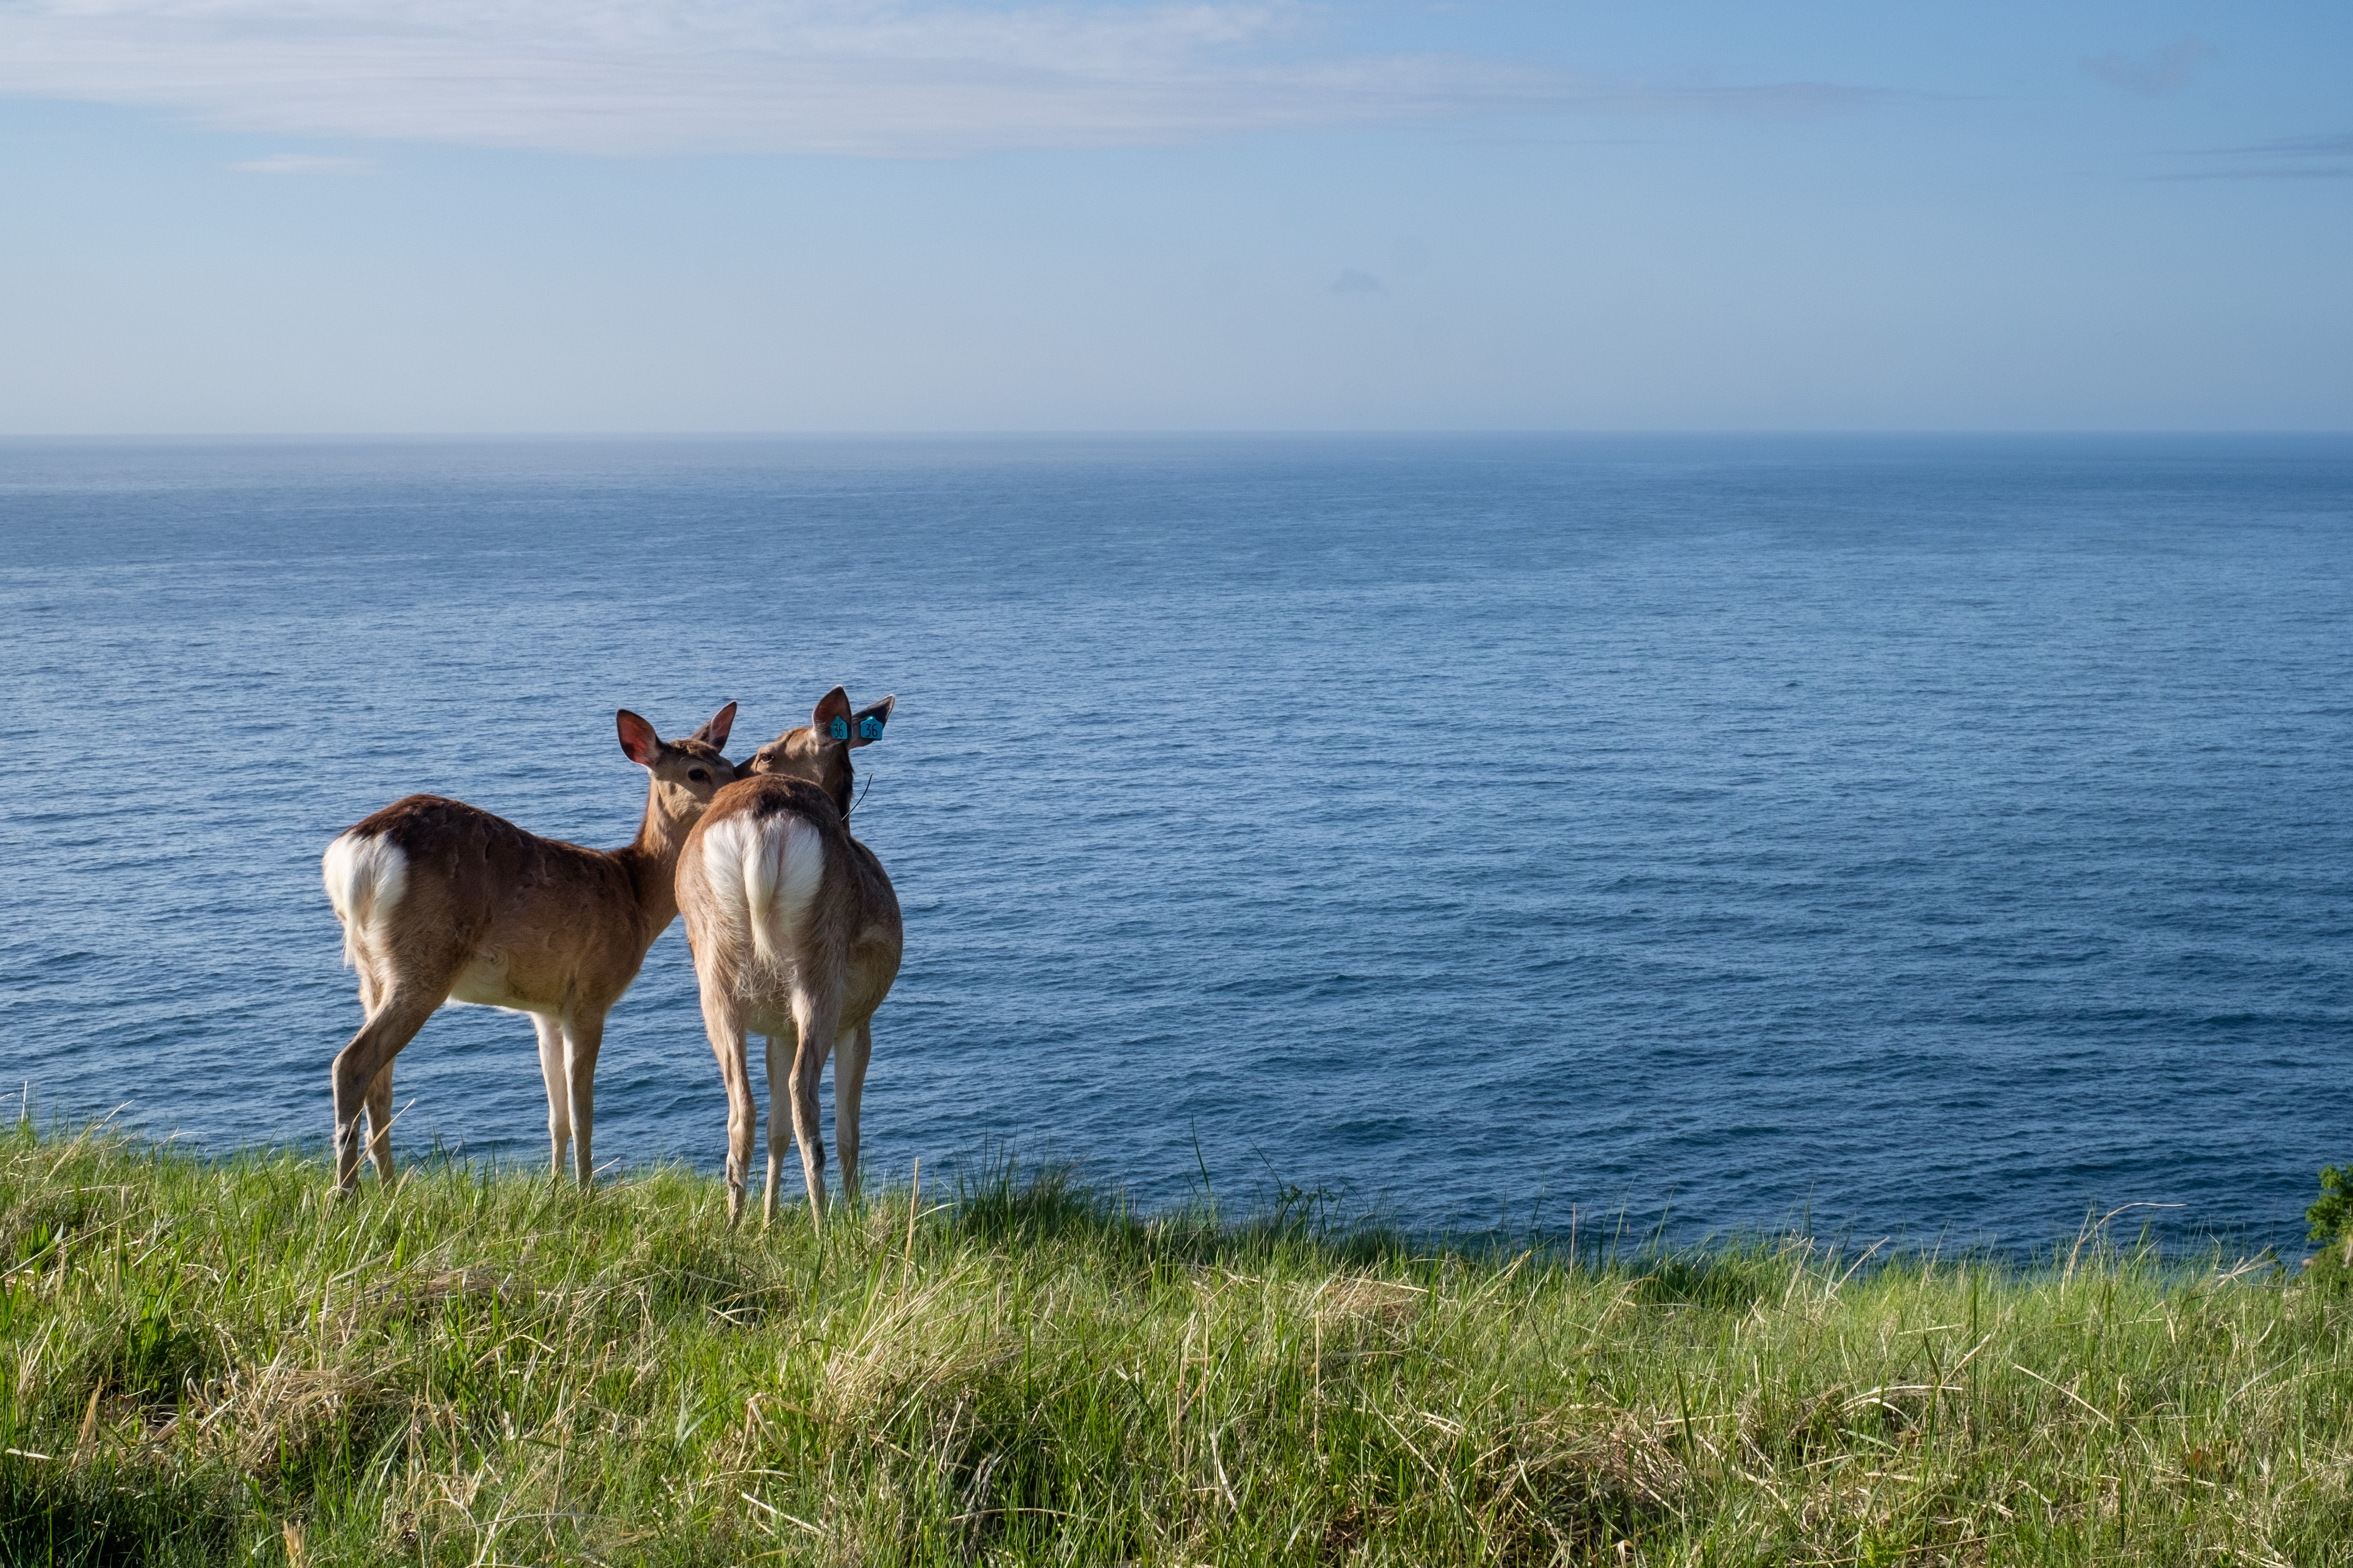 Two deer nuzzle on a grassy verge overlooking the Sea of Okhotsk